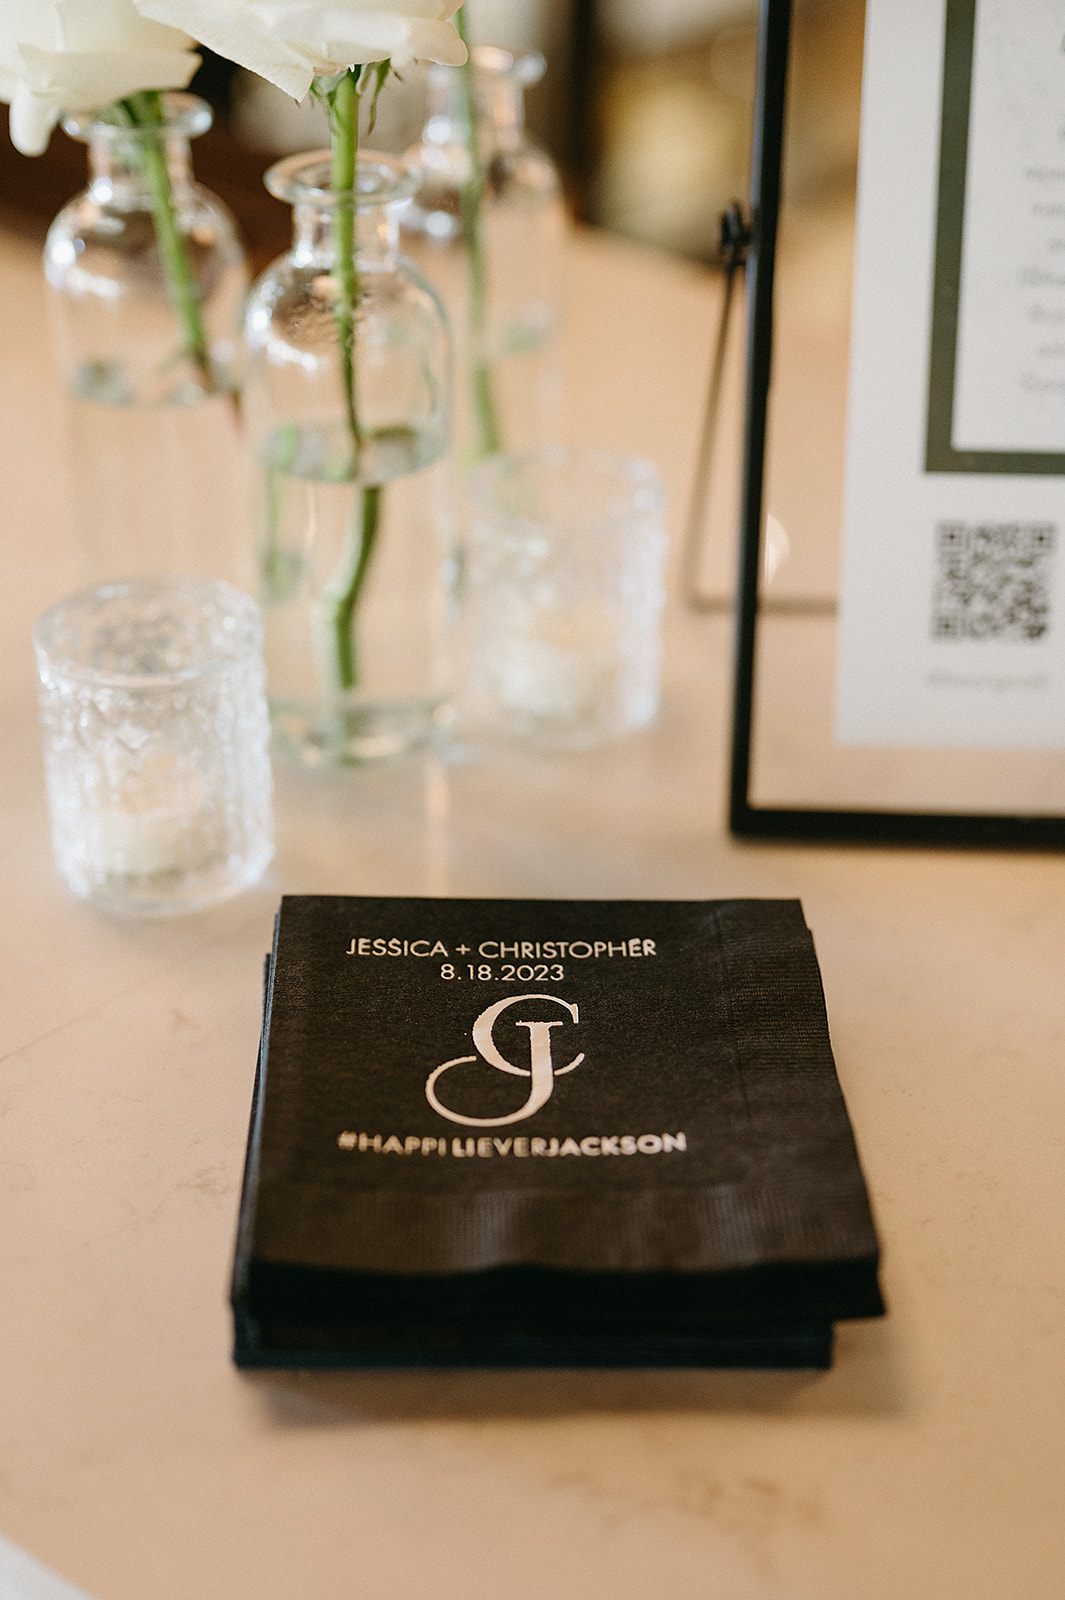 Details of custom printed napkins at the bar of a wedding